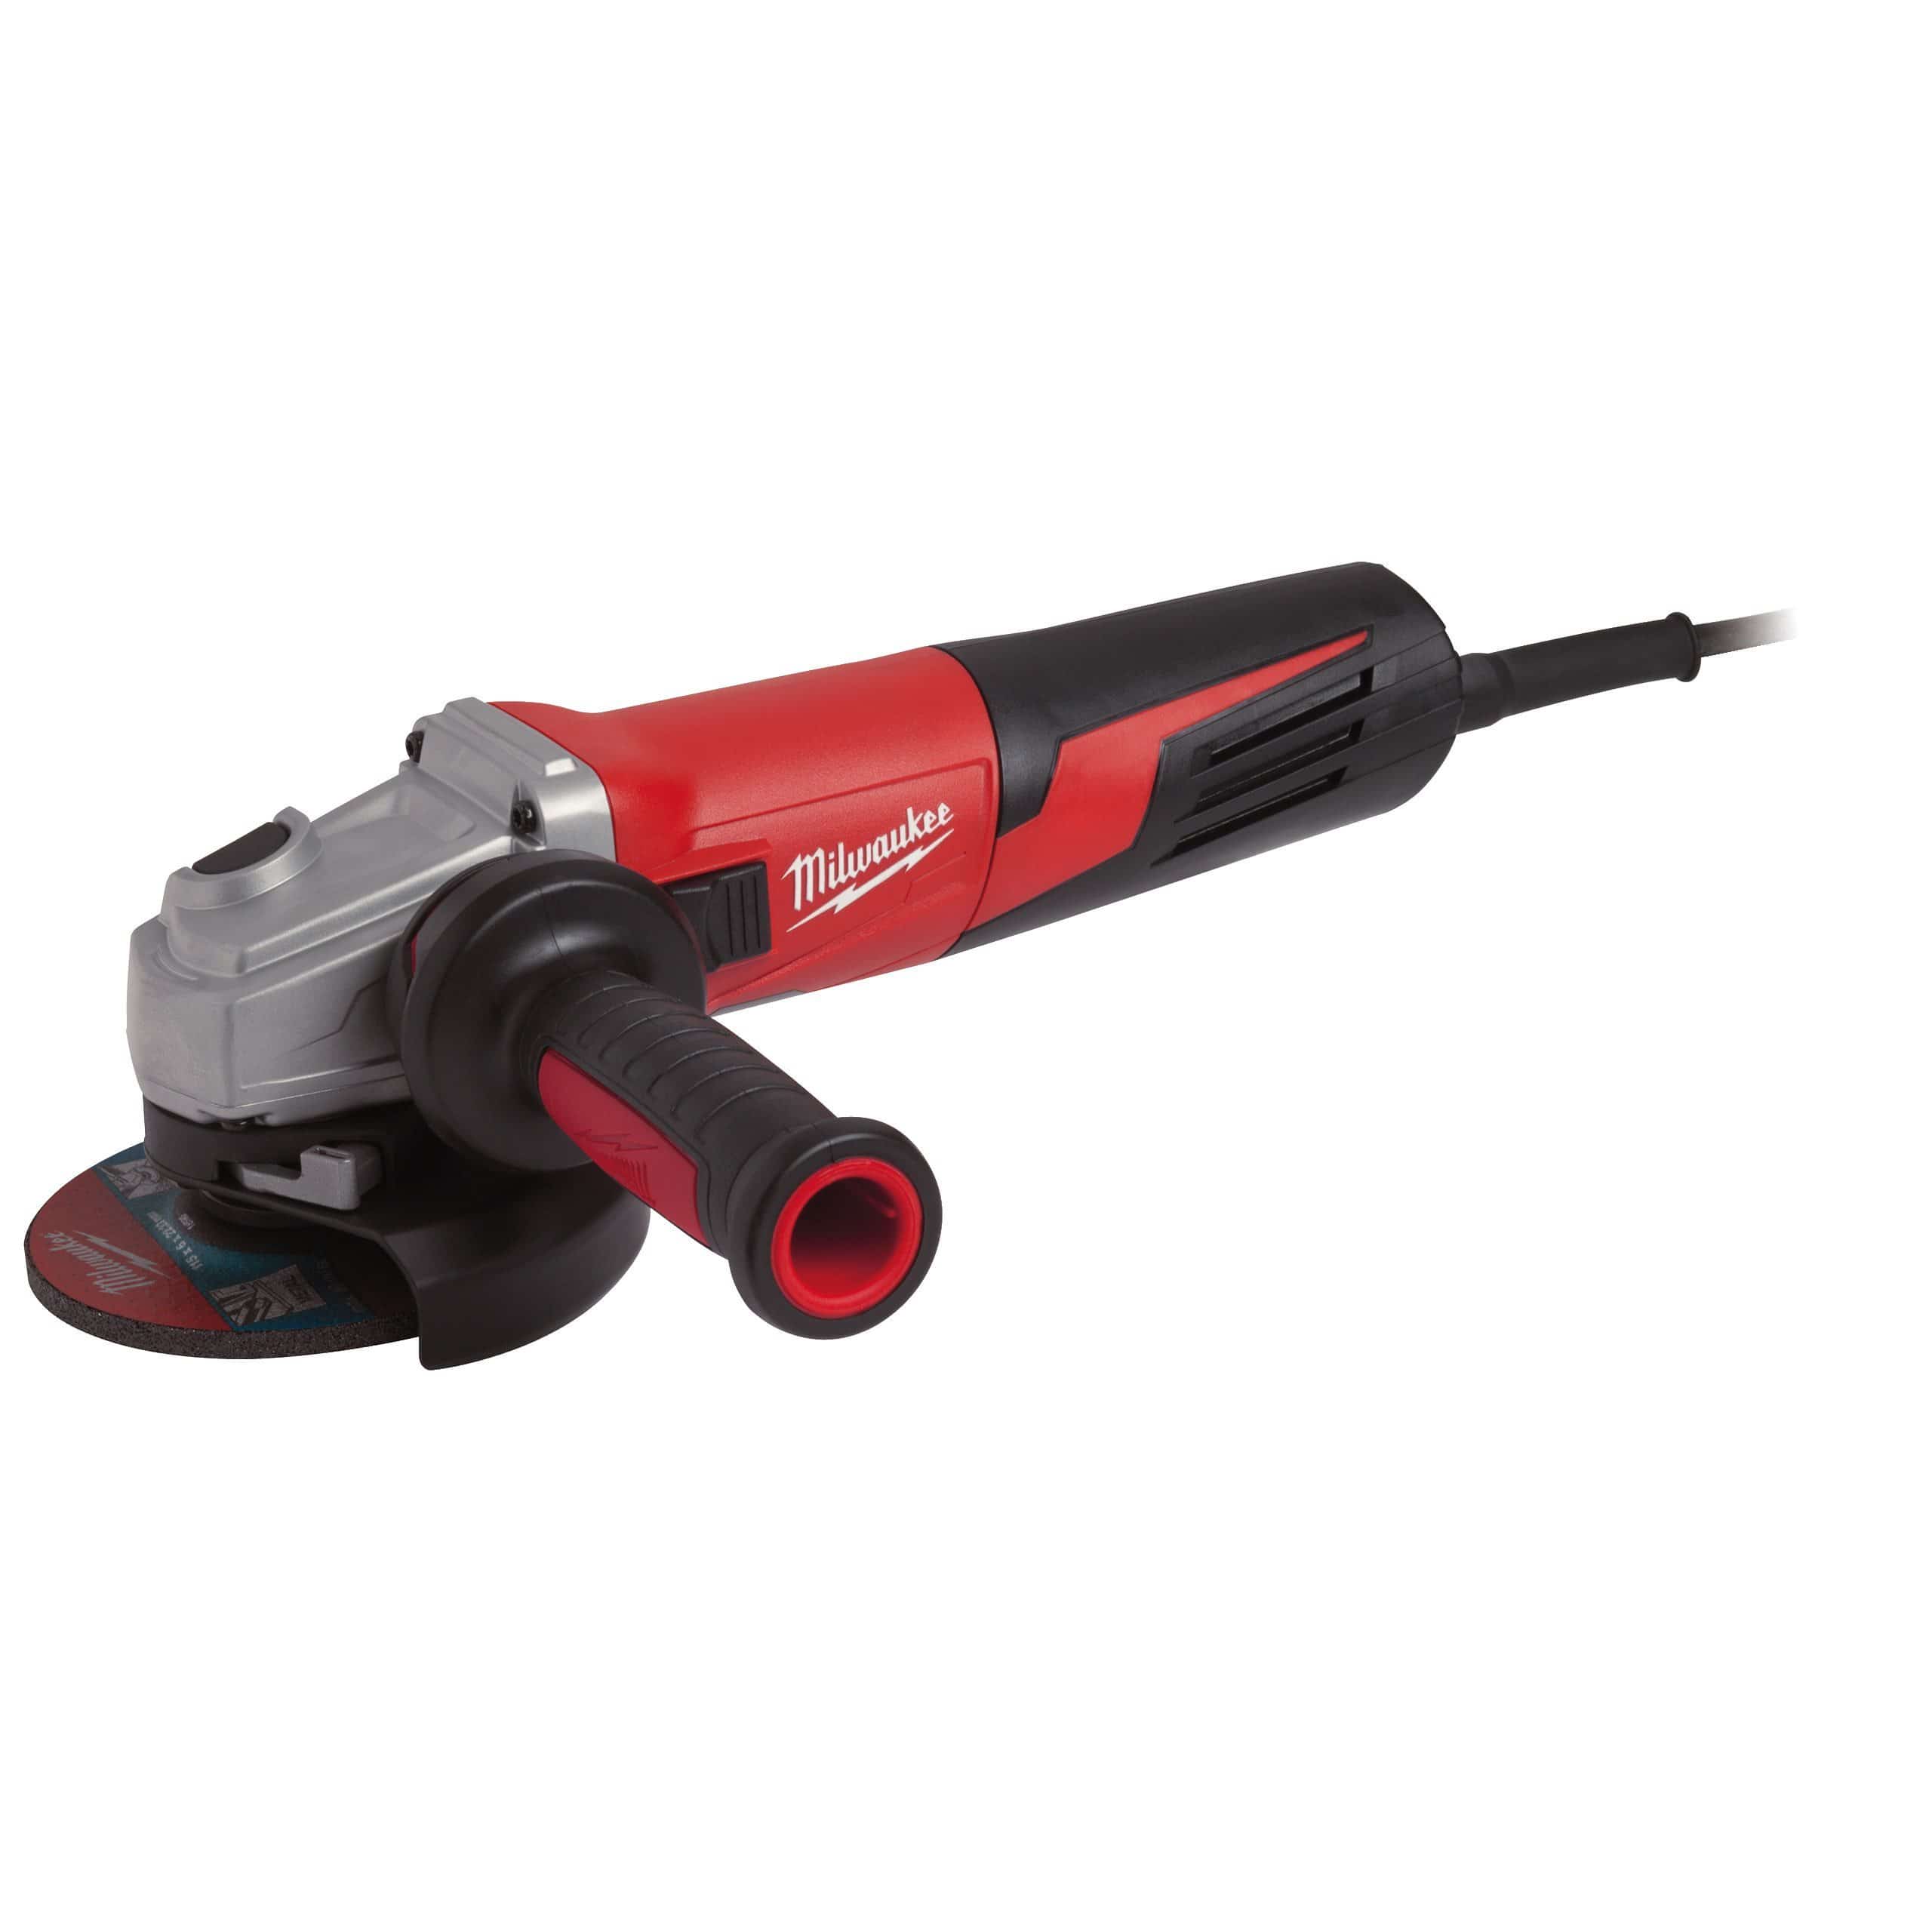 Milwaukee Angle Grinder 125mm 1550W with AVS - AGV 15-125 XC | Supply Master | Accra, Ghana Tools Building Steel Engineering Hardware tool